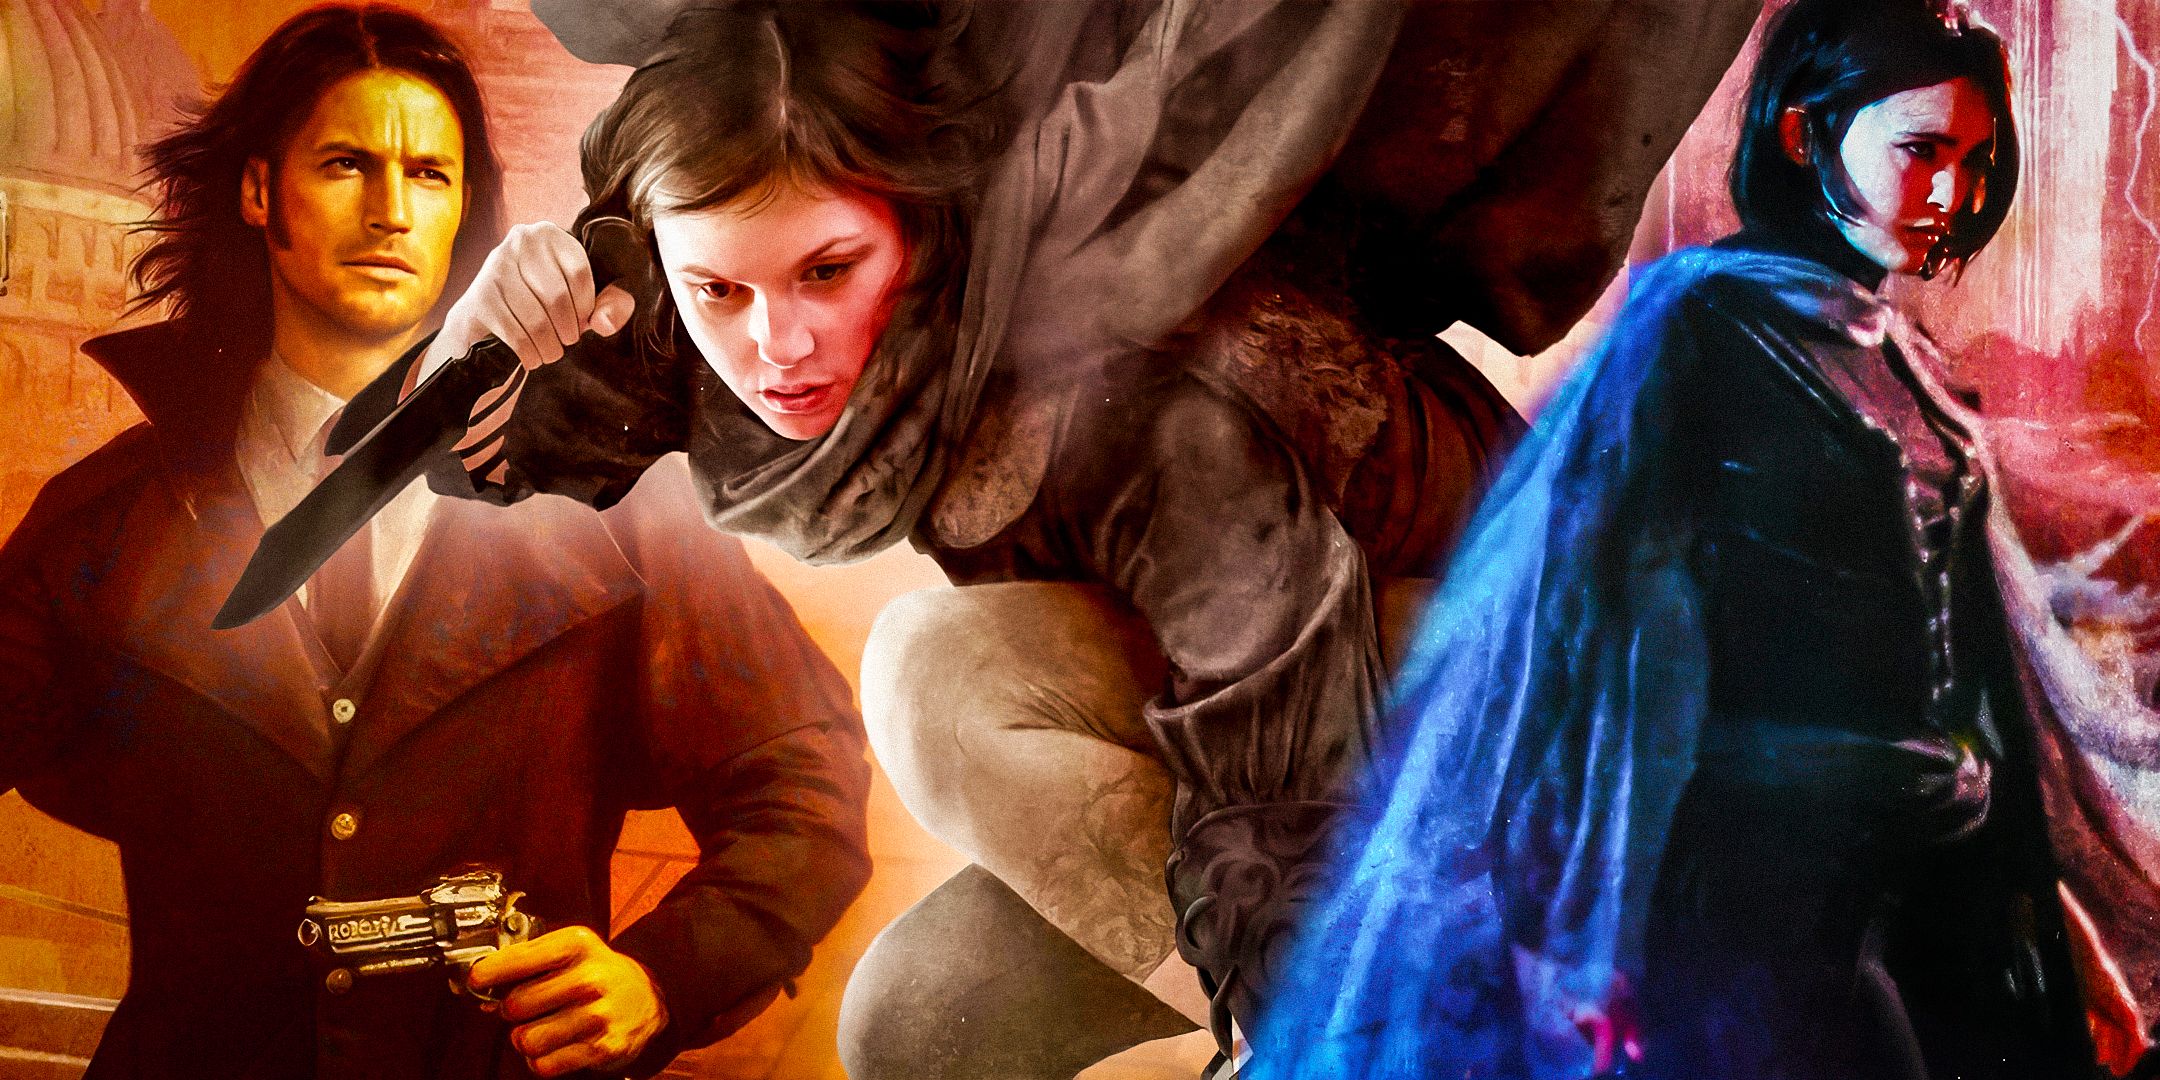 Vin and Waxillium on various Mistborn covers